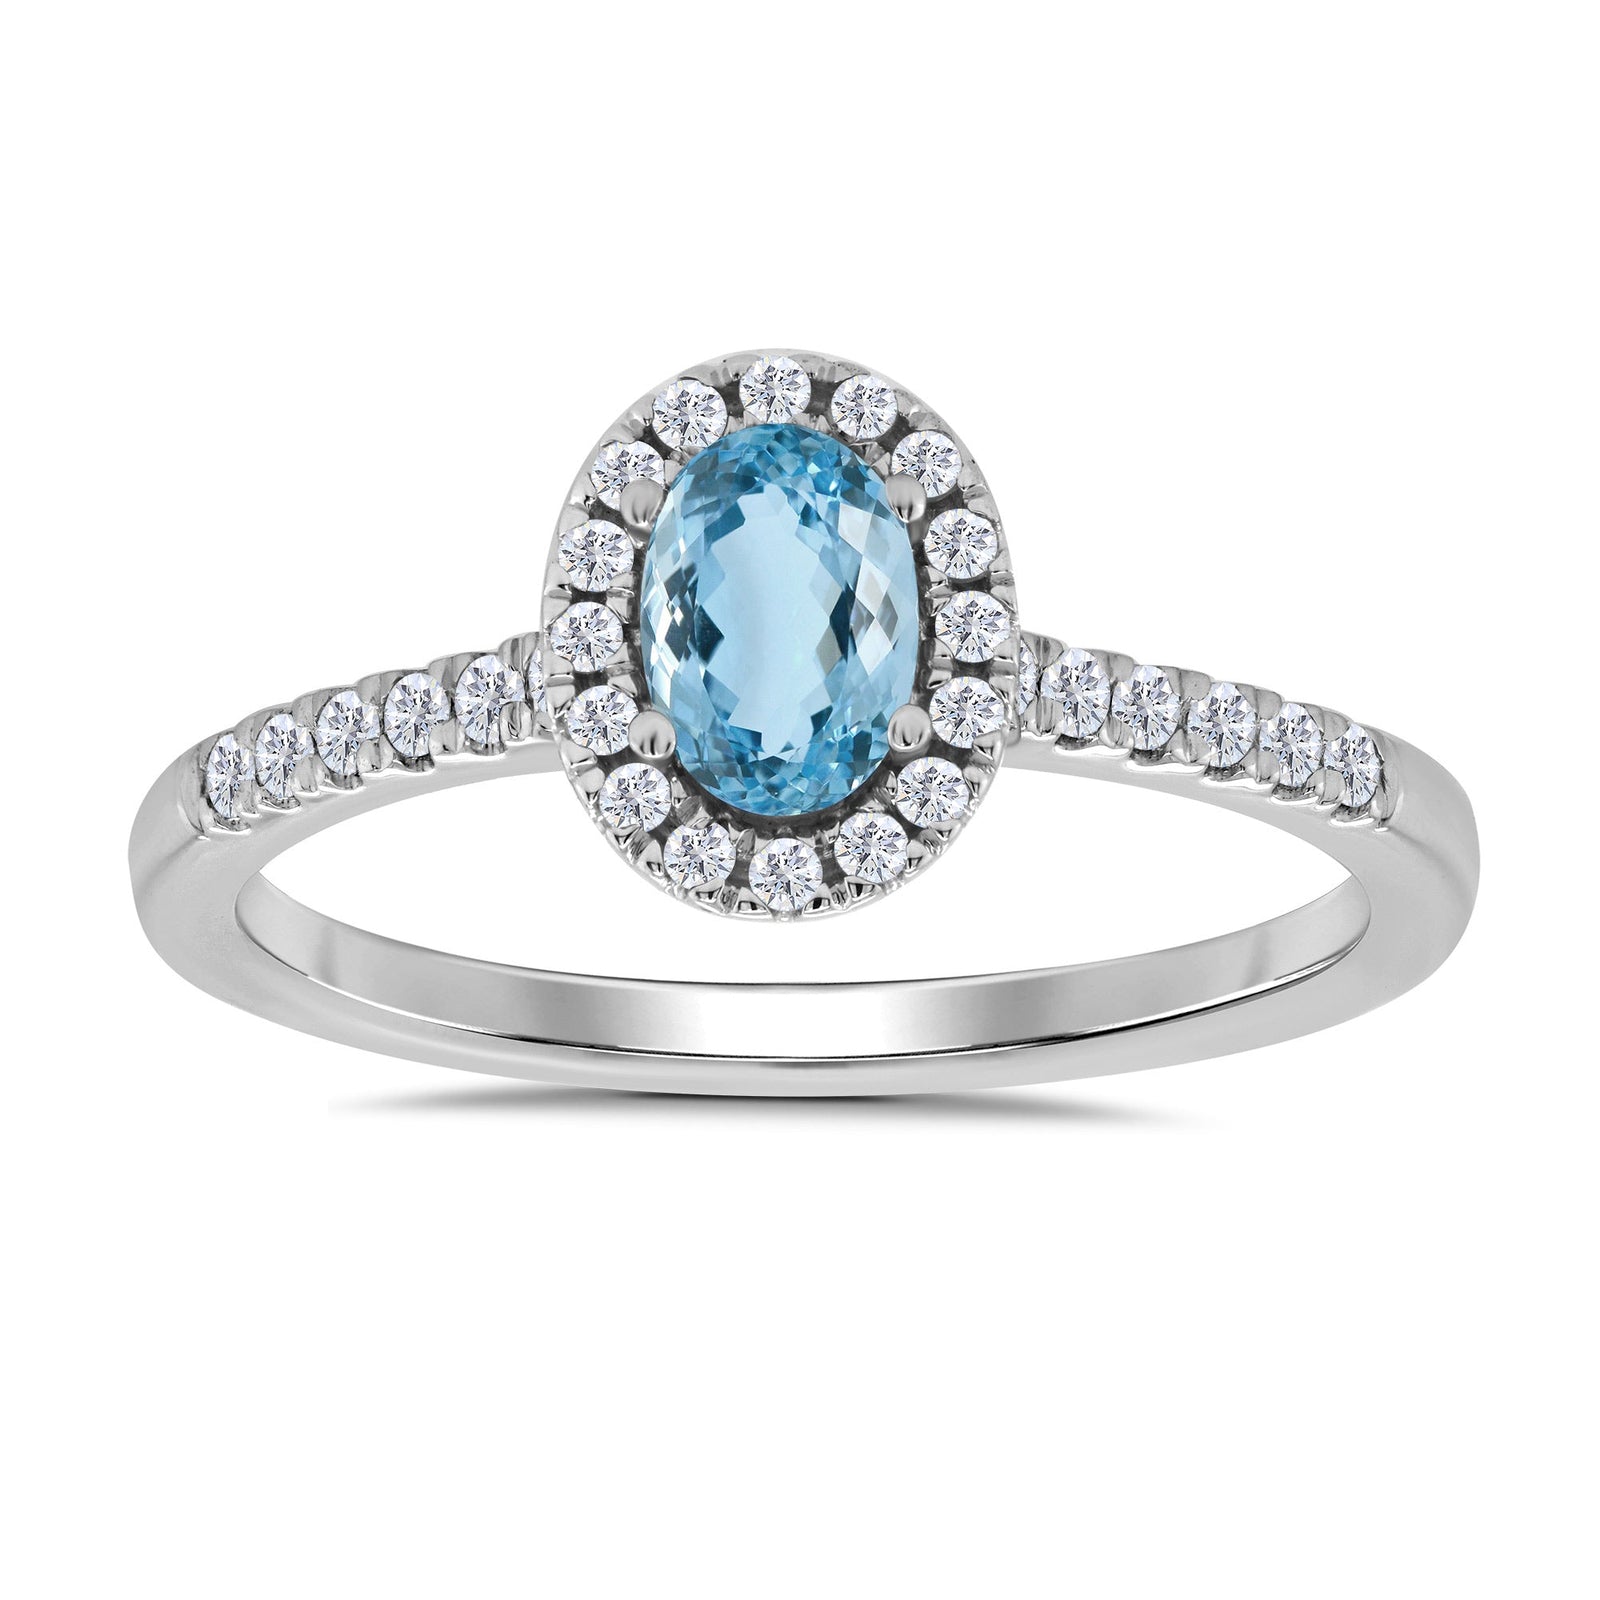 9ct white gold 6x4mm oval aquamarine & diamond cluster ring with diamond shoulders 0.20ct